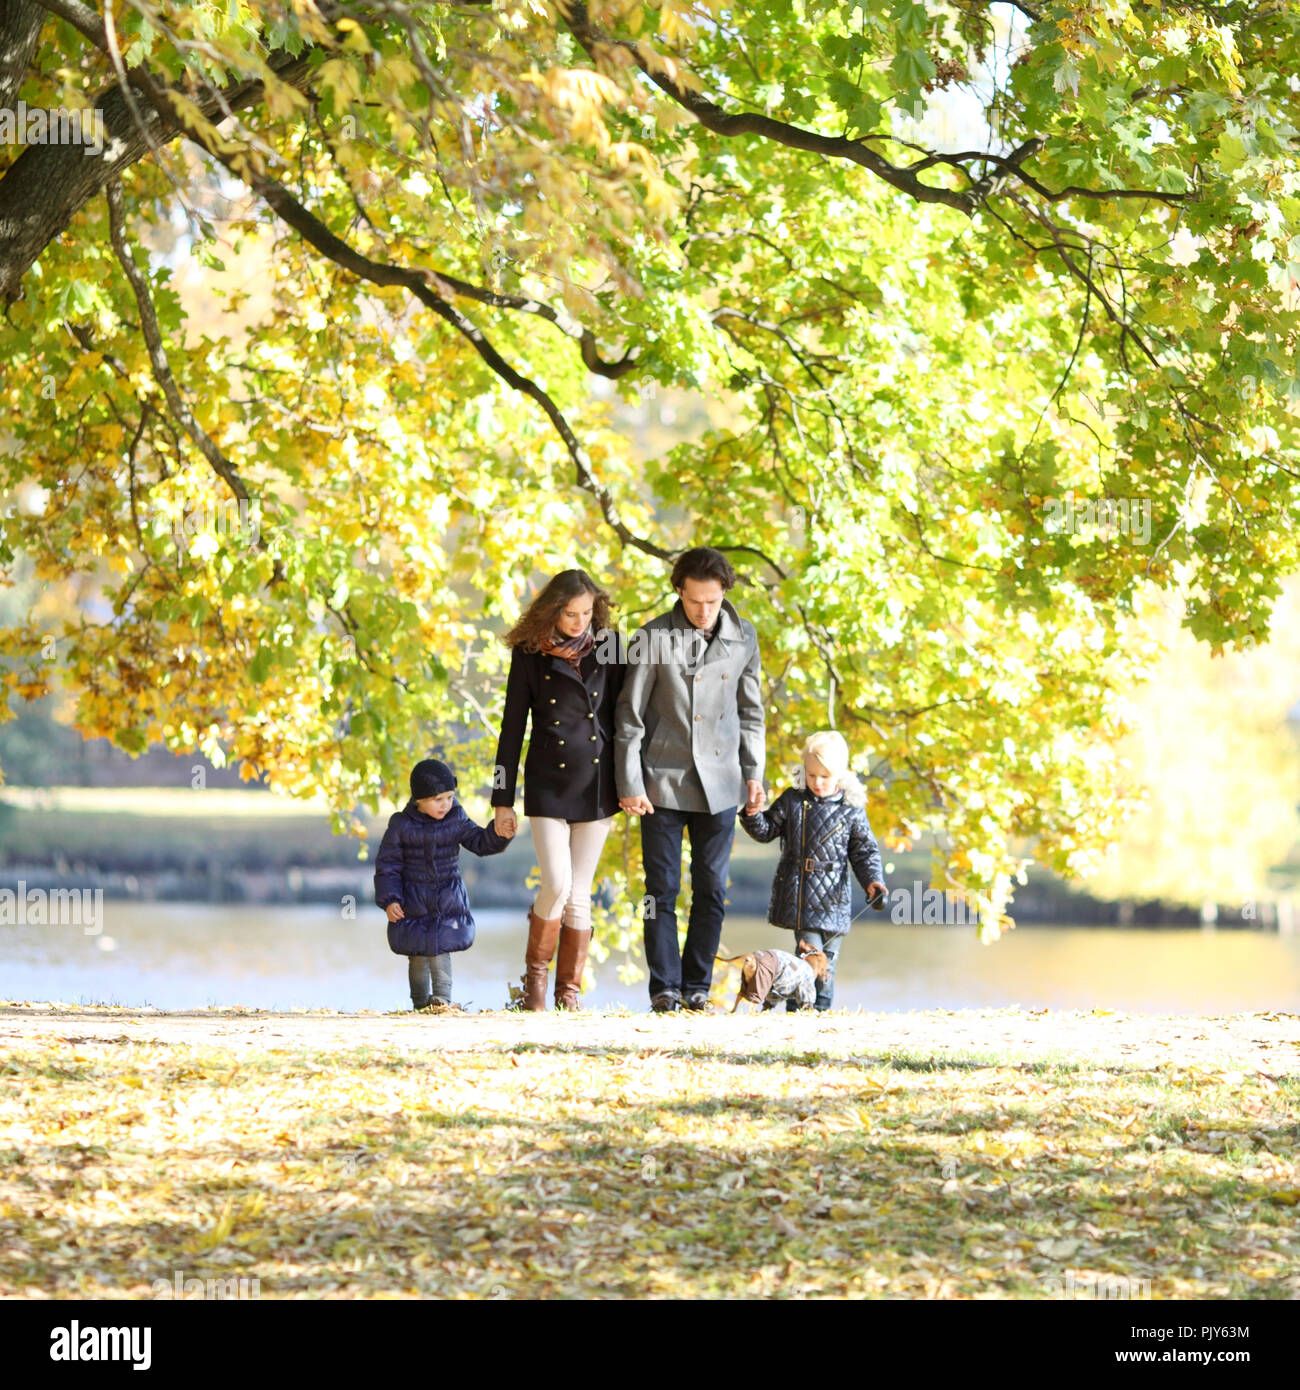 Happy family with two children walking in sunny autumn park holding hands Stock Photo